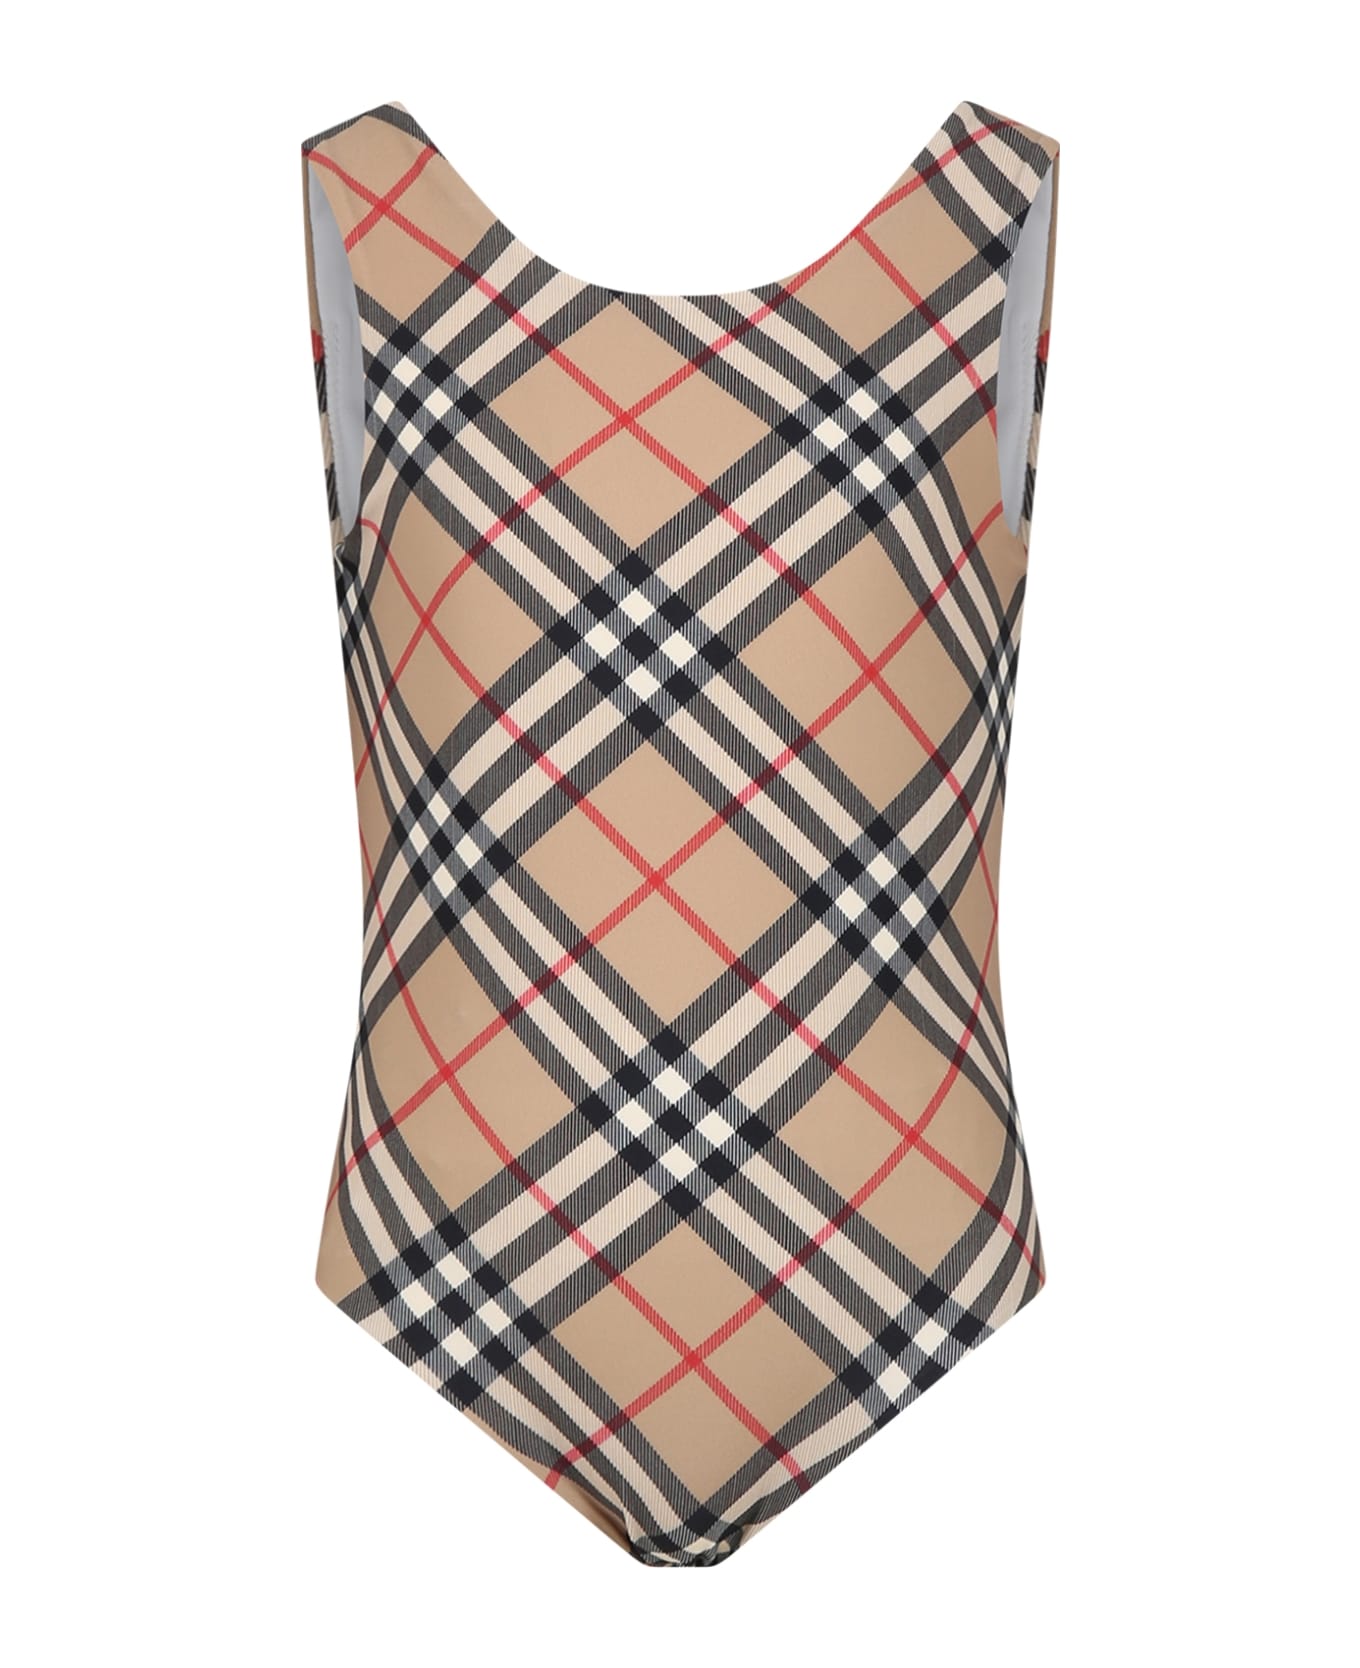 Burberry Beige Swimsuit For Girl With Iconic Check - Beige 水着